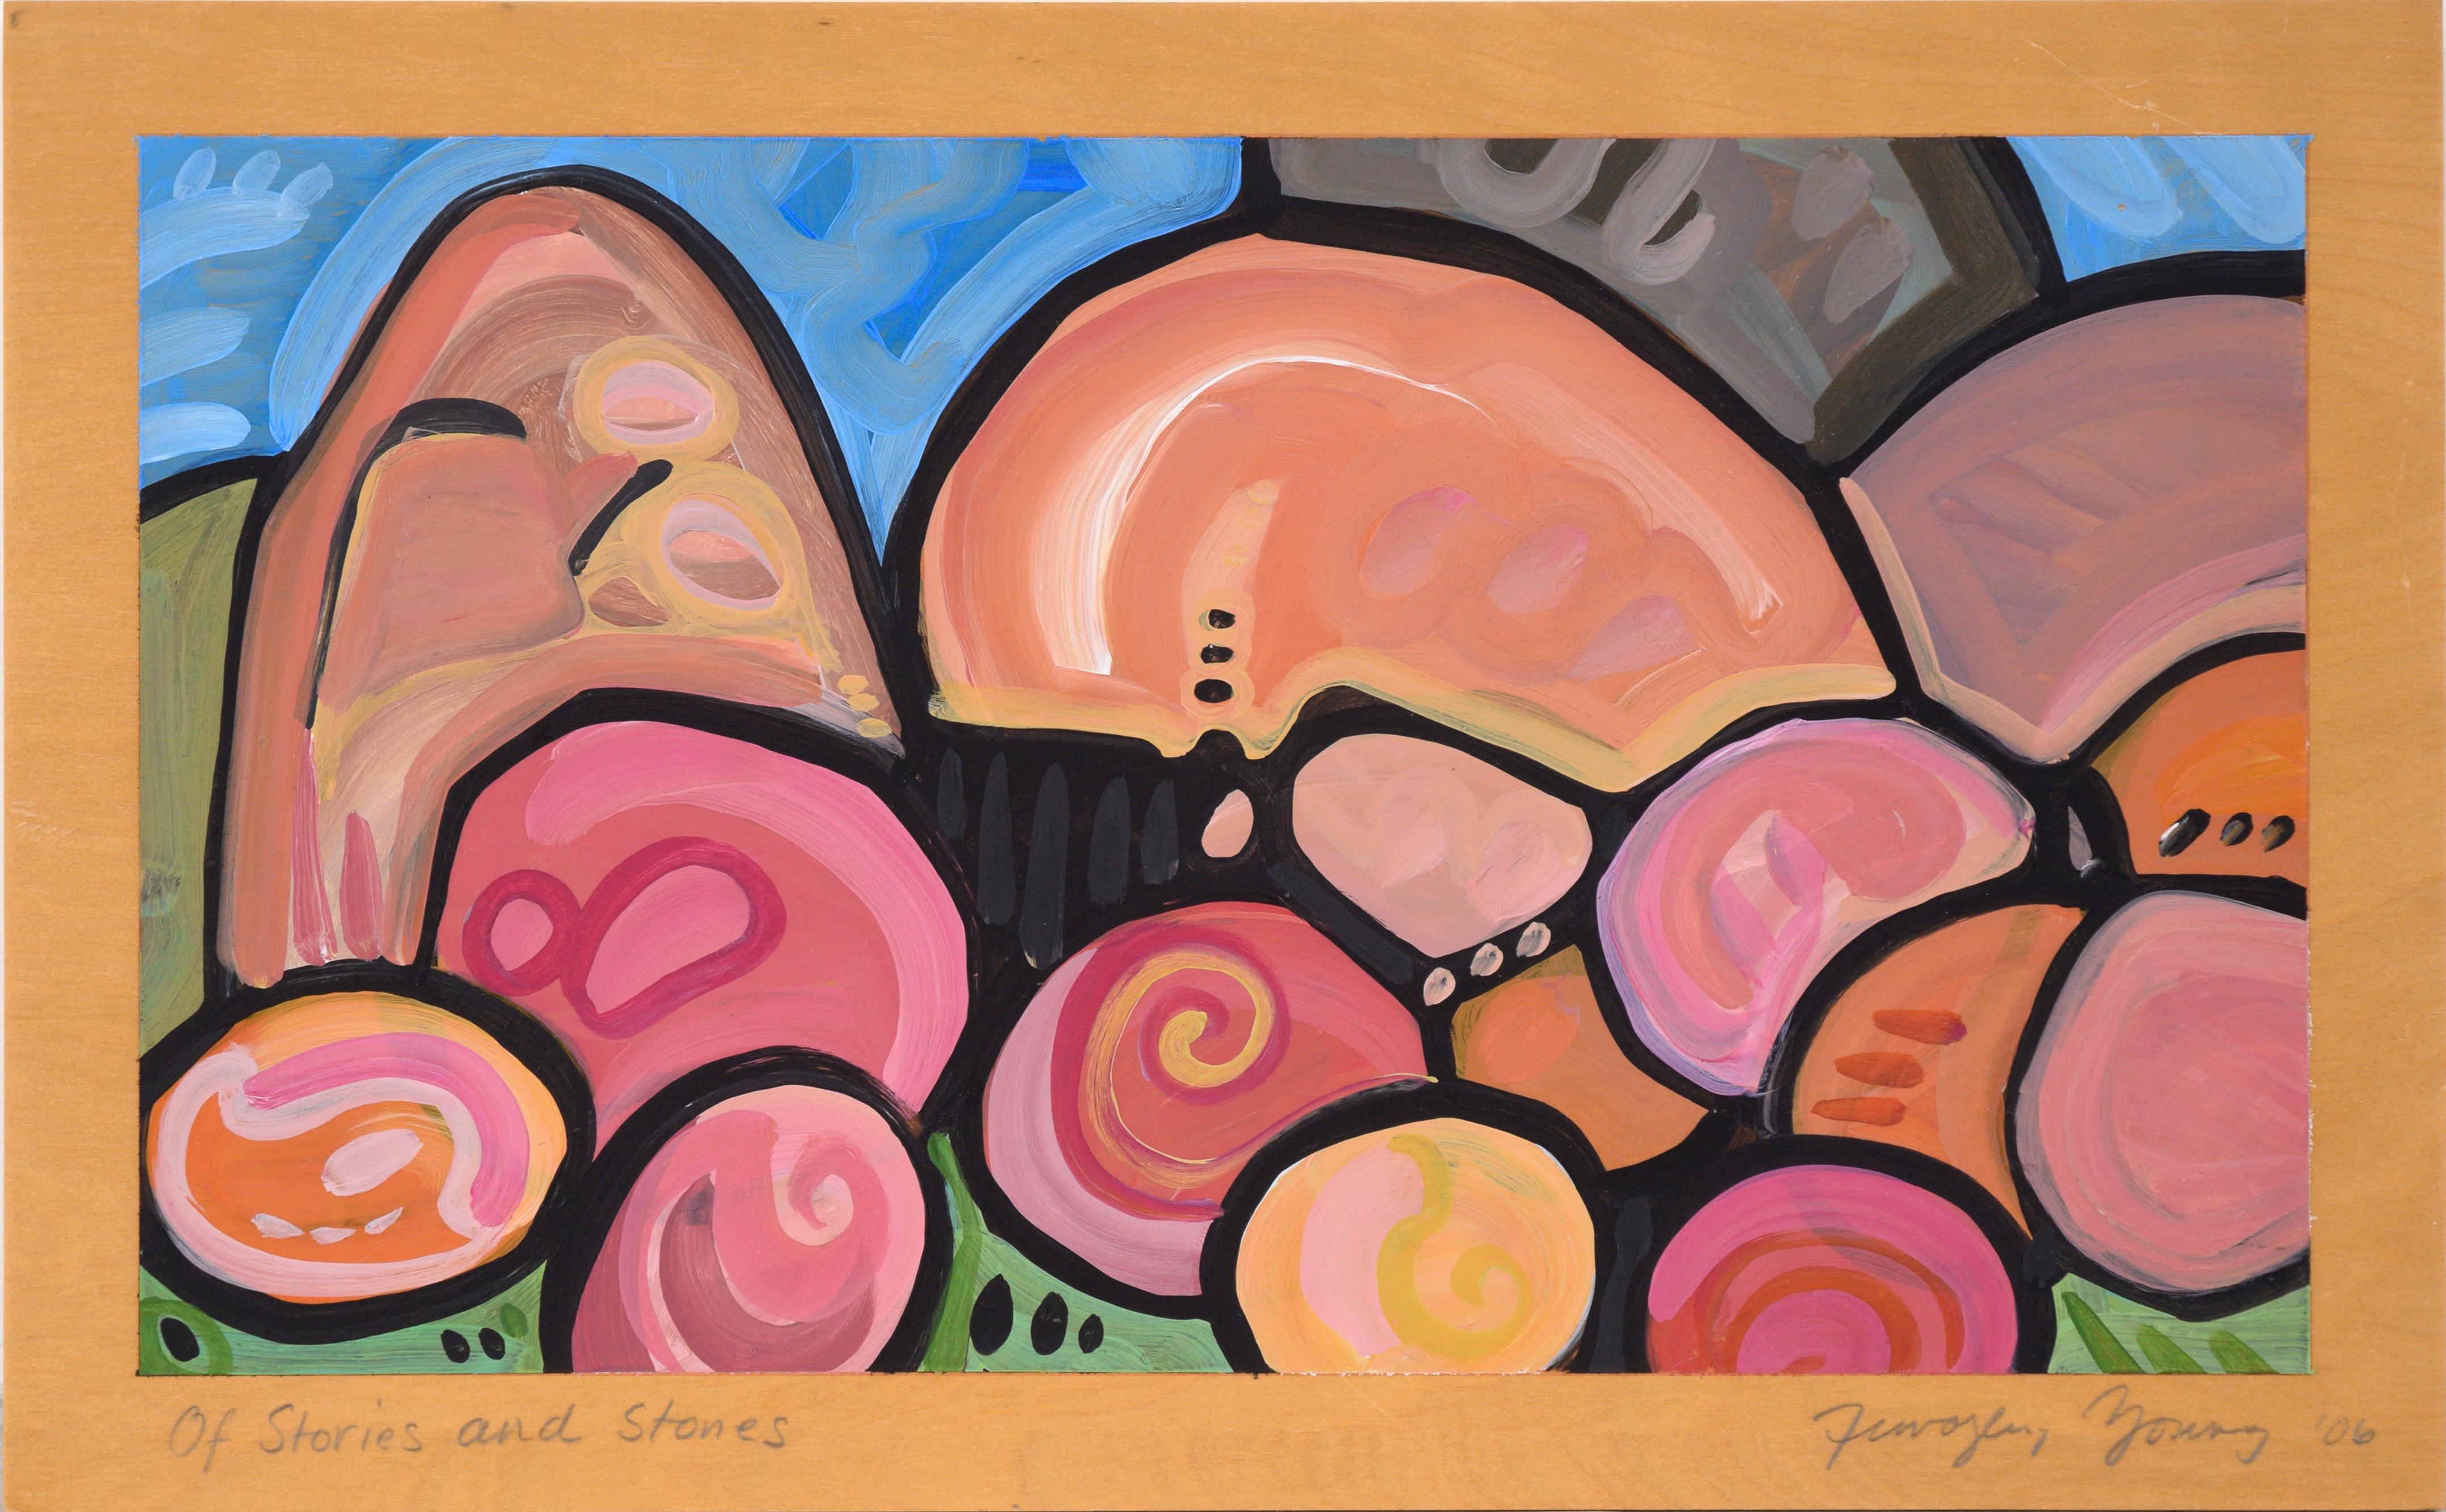 Timothy Young Abstract Painting - "Of Stories and Stones" Whimsical Landscape in Acrylic on Wood Panel